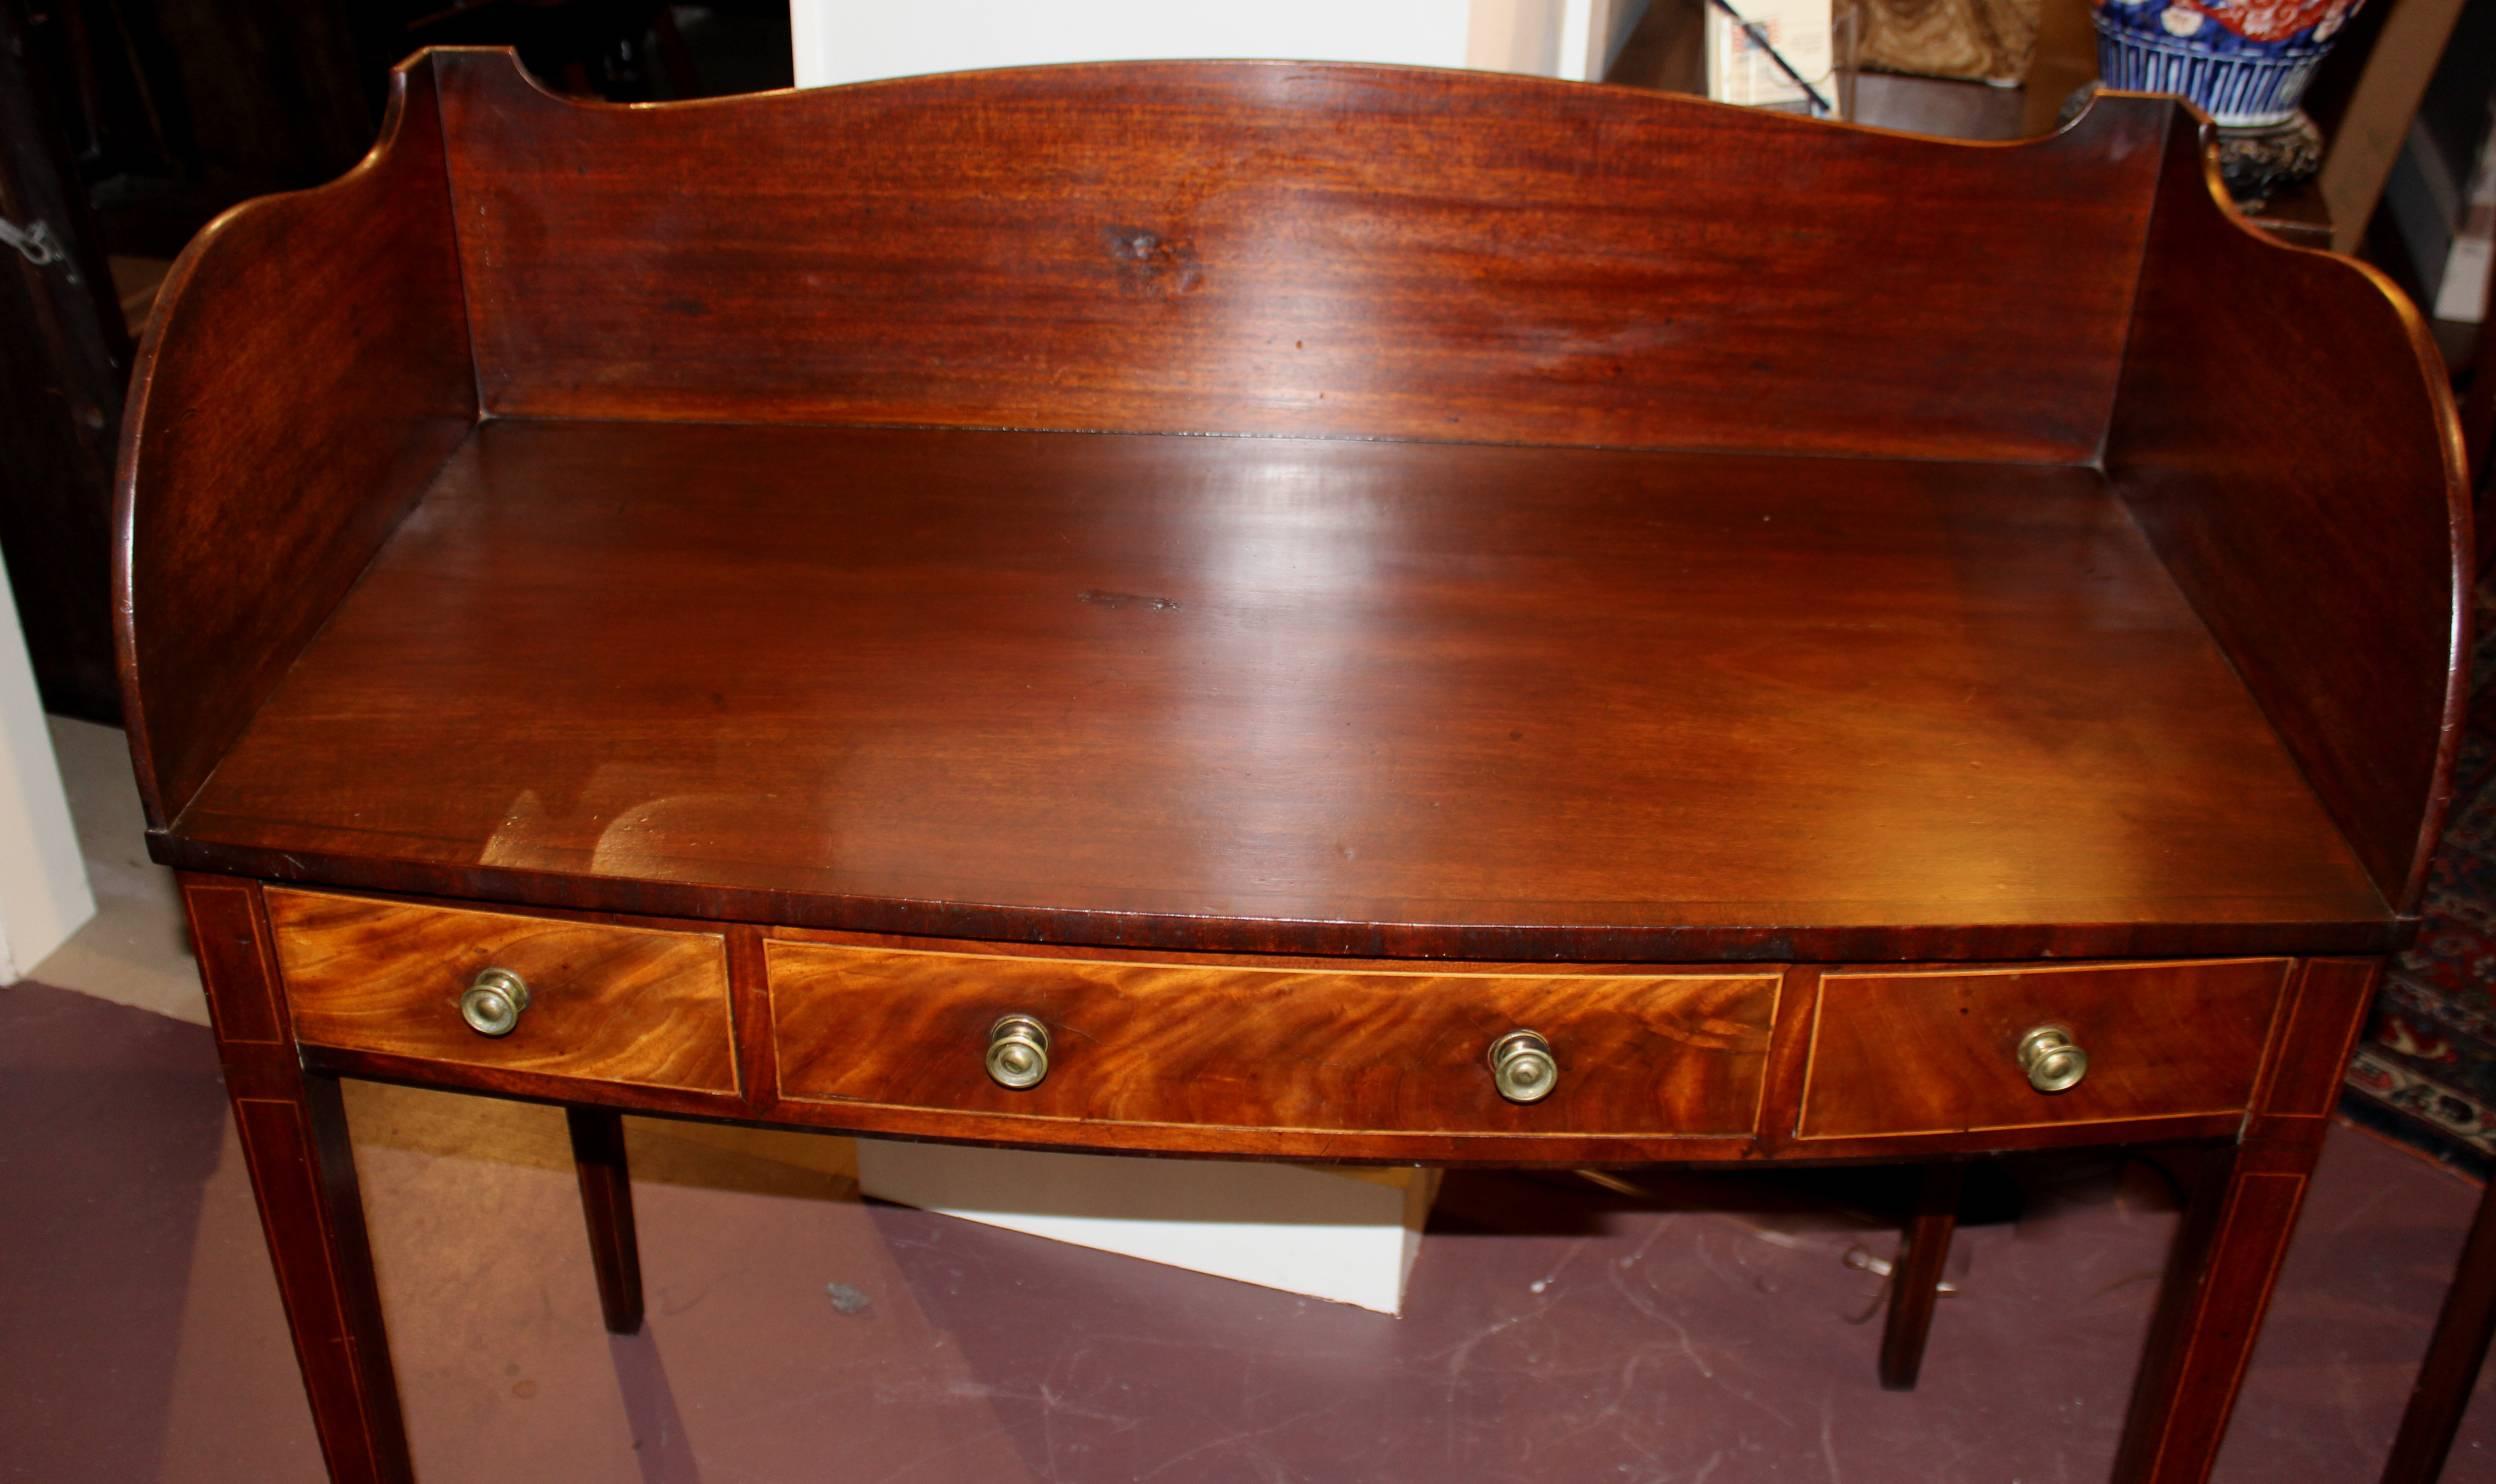 A fine mahogany bow front mahogany server with nicely shaped splash rail and delicate line inlay, two fitted small drawers flanking a center false drawer, all supported with four square tapered legs. The brasses appear to be original to the piece.